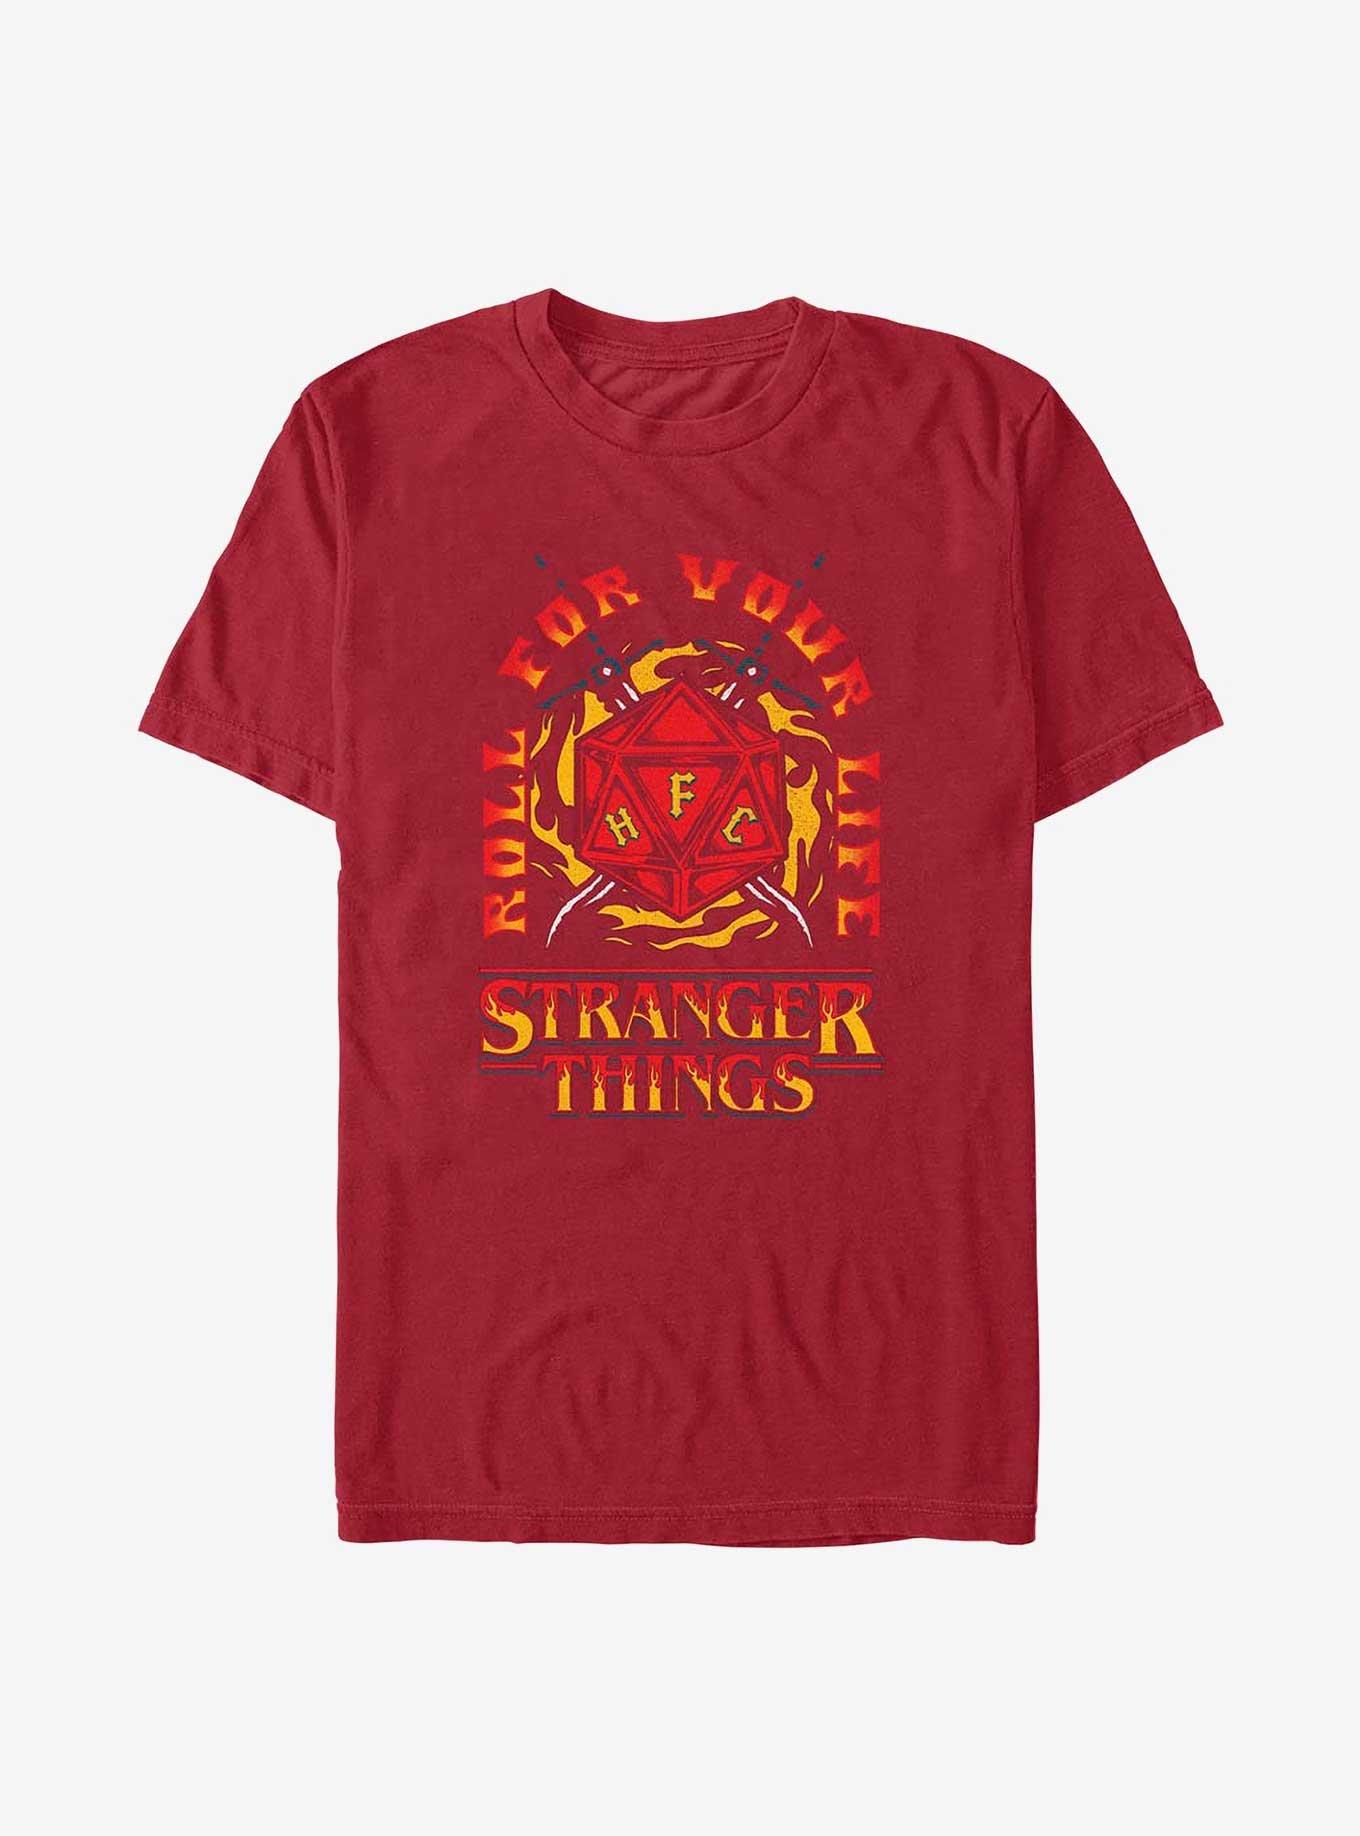 Stranger Things Fire and Dice T-Shirt, CARDINAL, hi-res